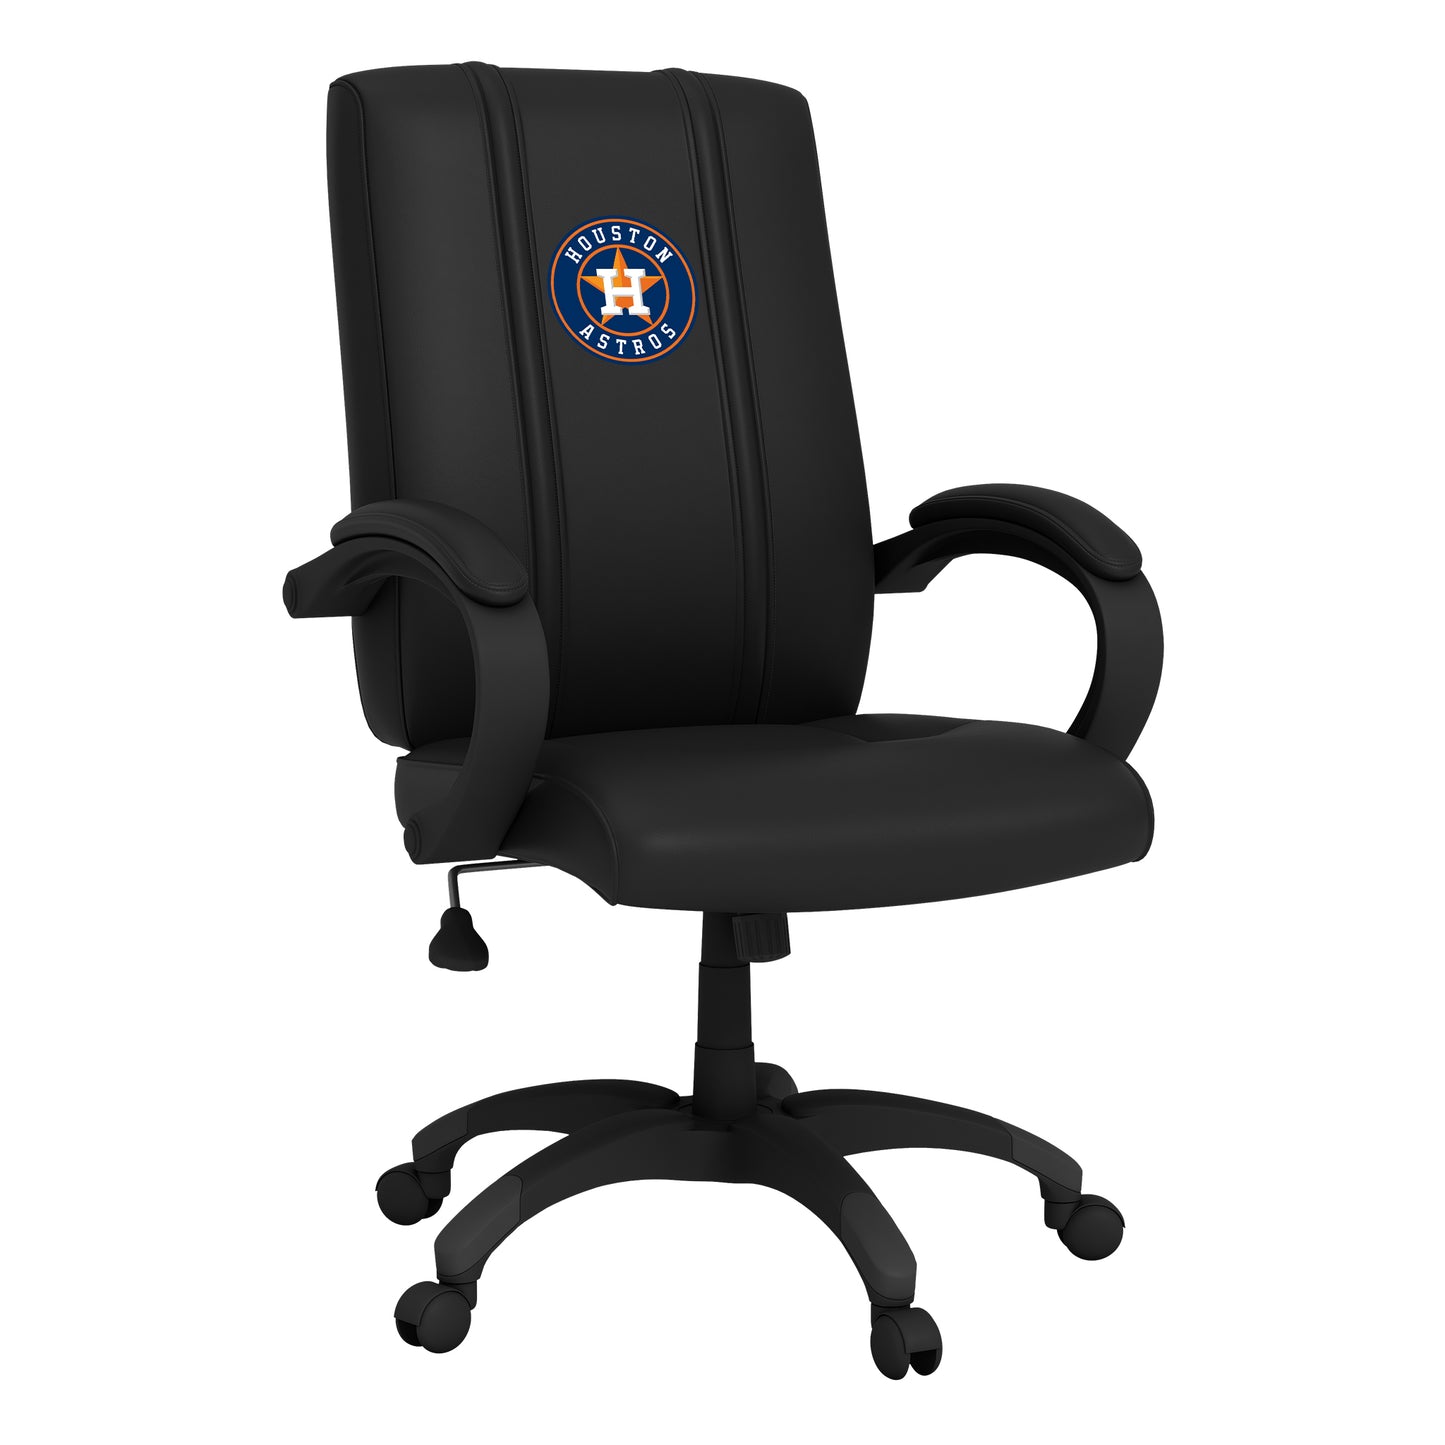 Office Chair 1000 with Houston Astros Logos